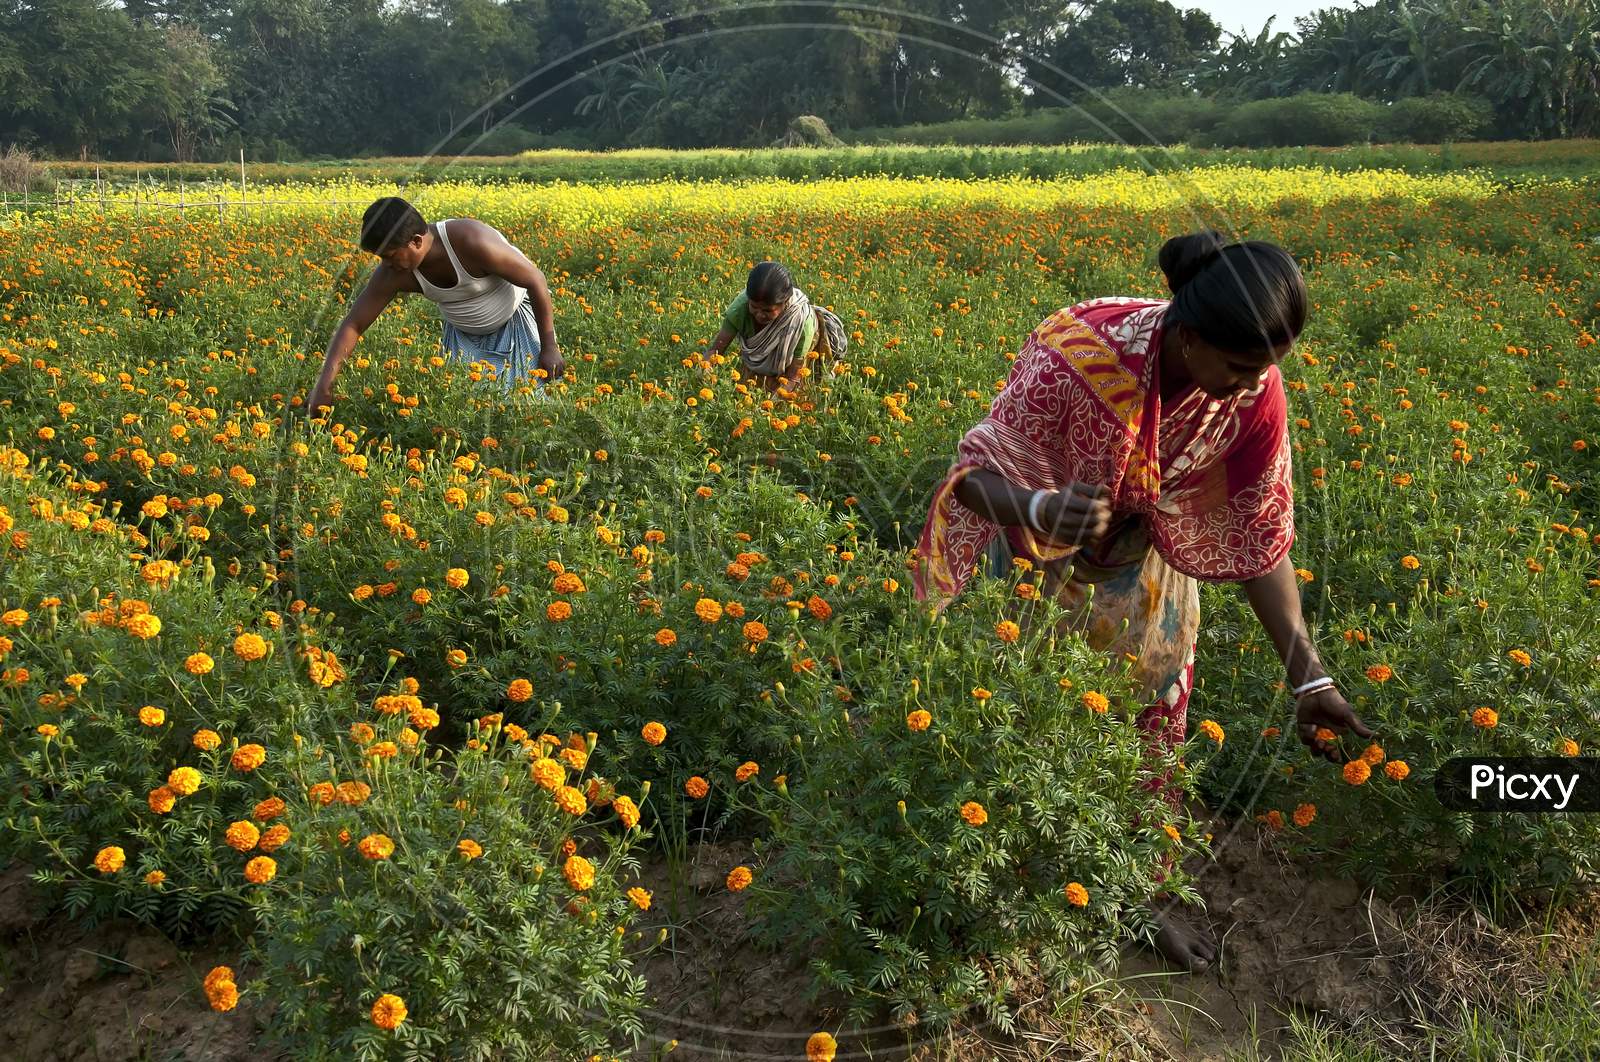 The growers of the marigold flowers are picking up flowers.